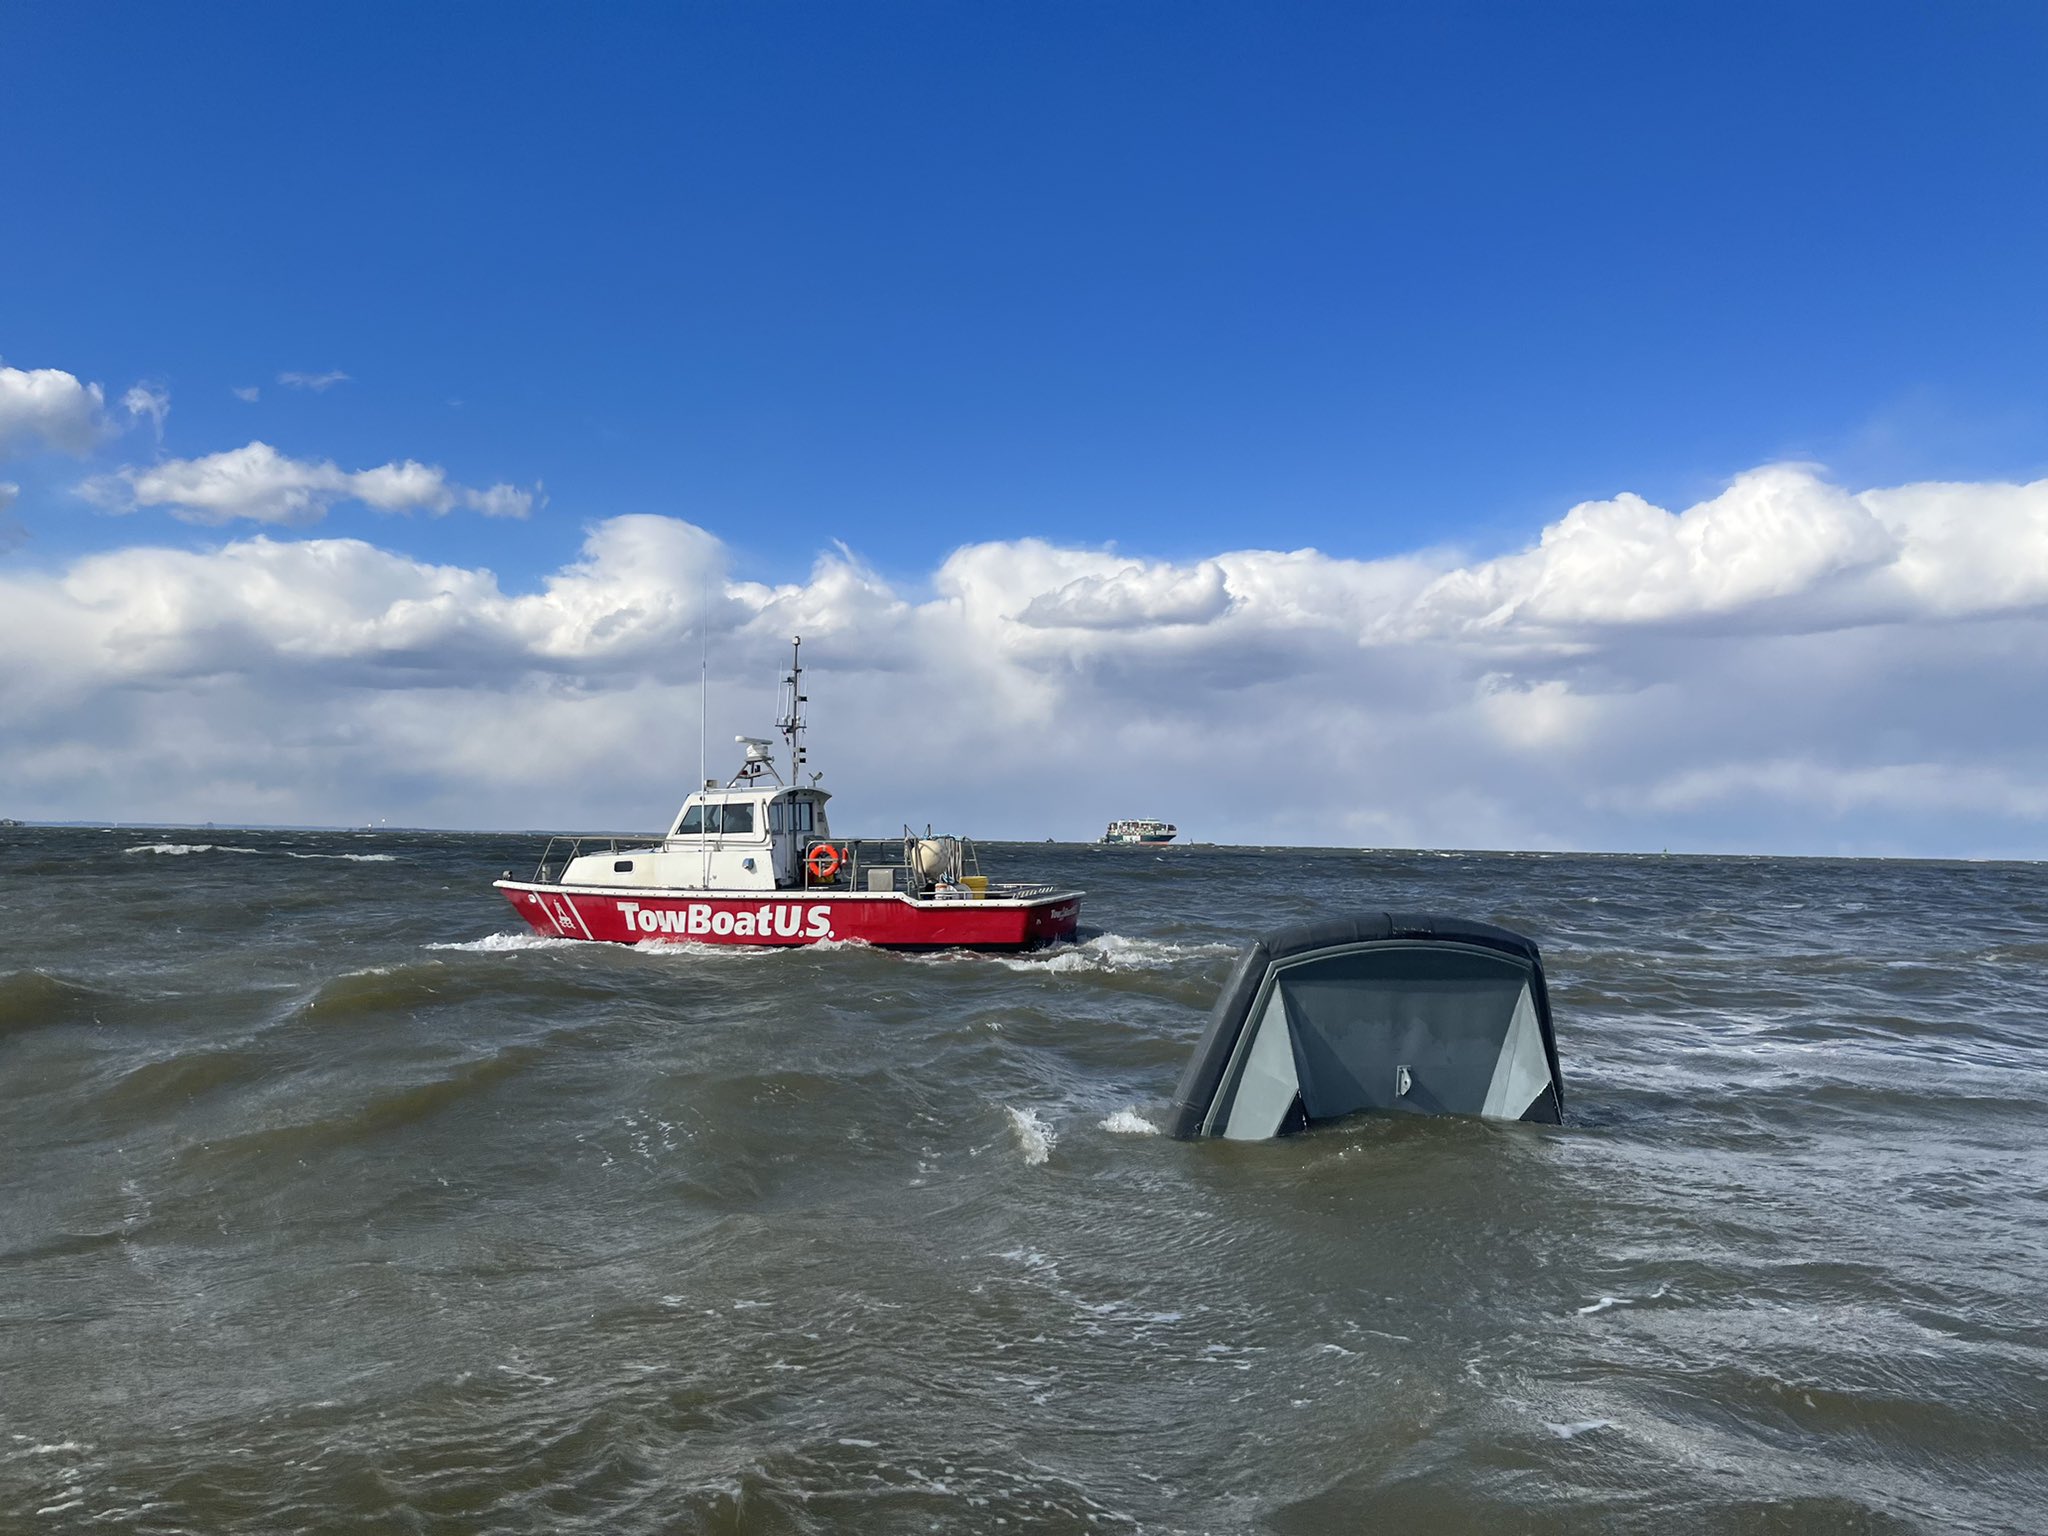 VIDEO: Boating Lessons Learned from Fire Boat's Sinking | Chesapeake Bay  Magazine